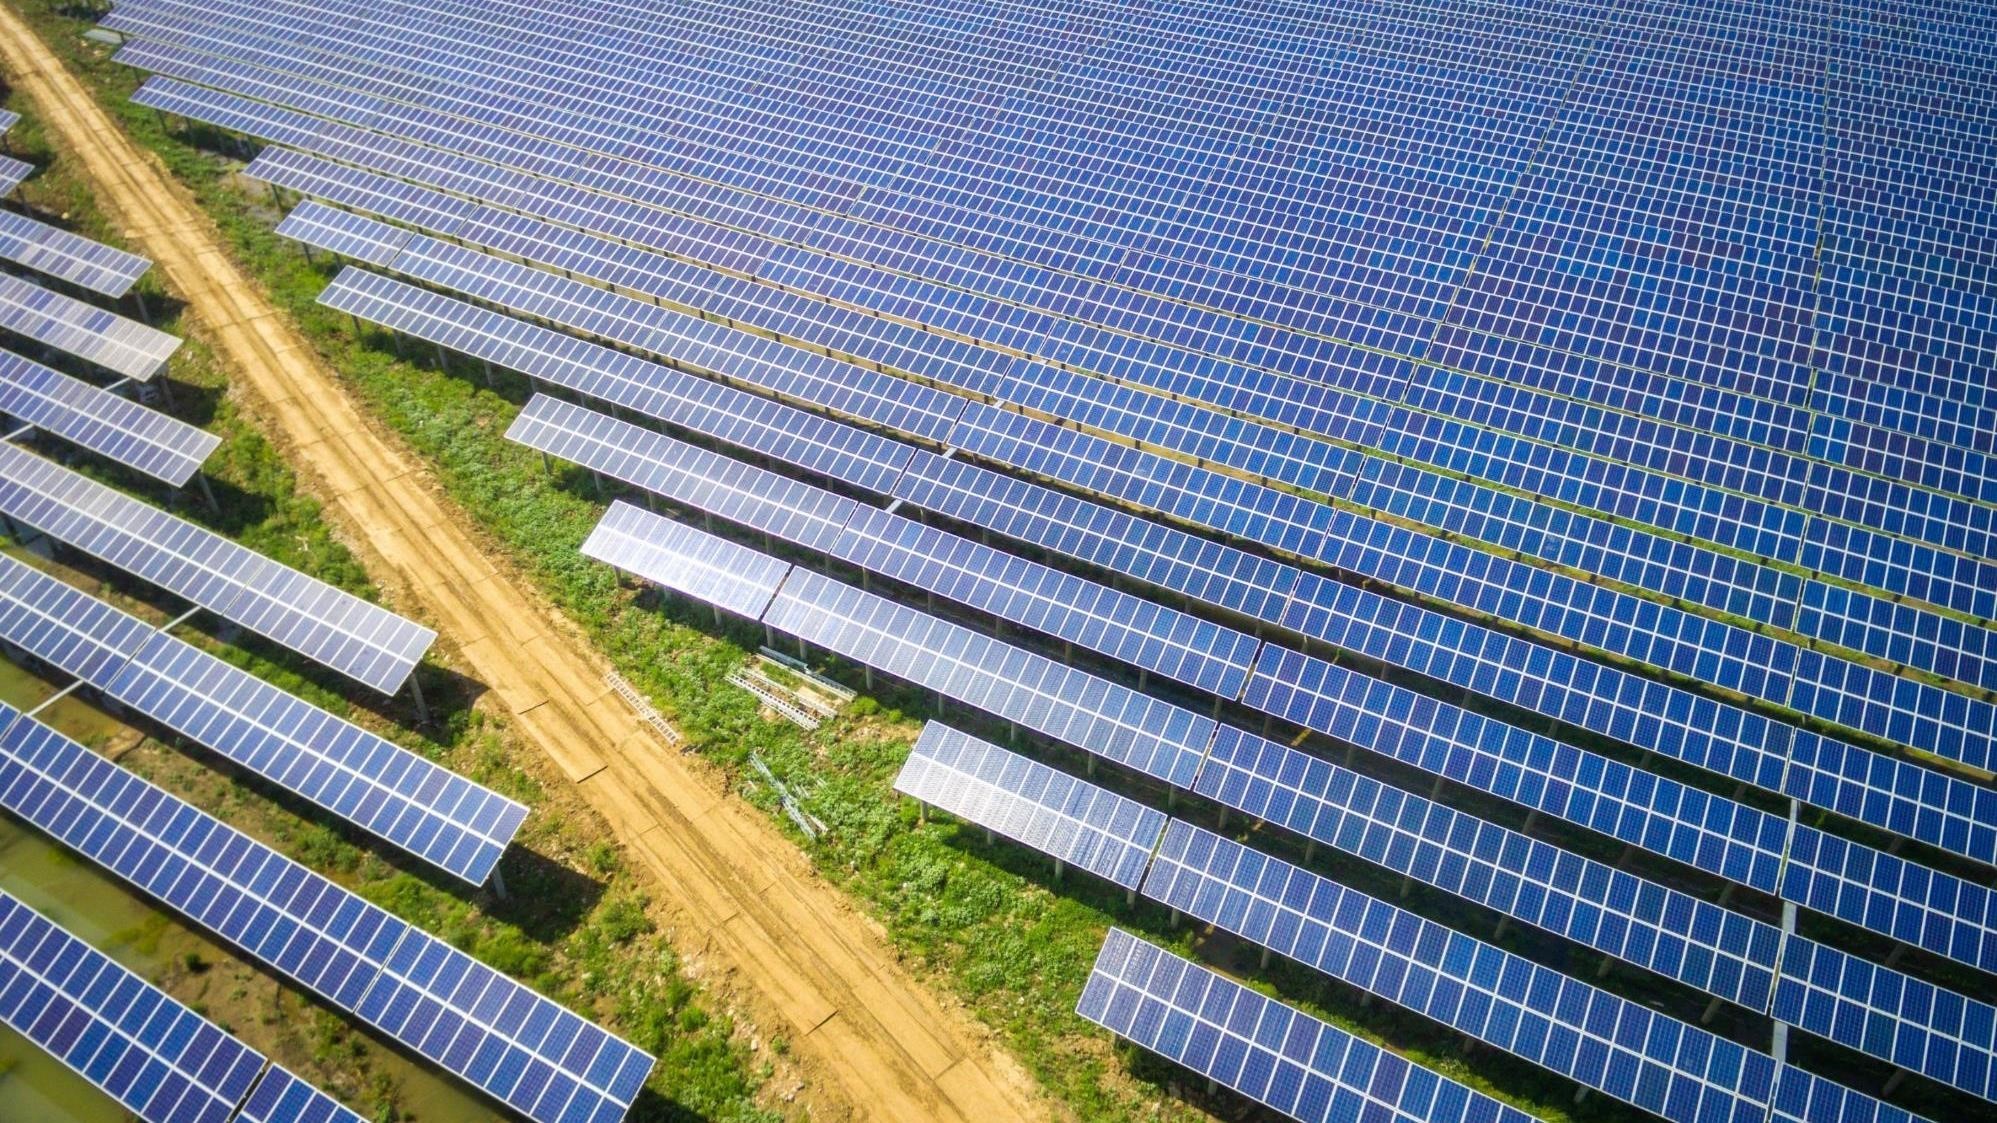 Angola is turning to solar energy